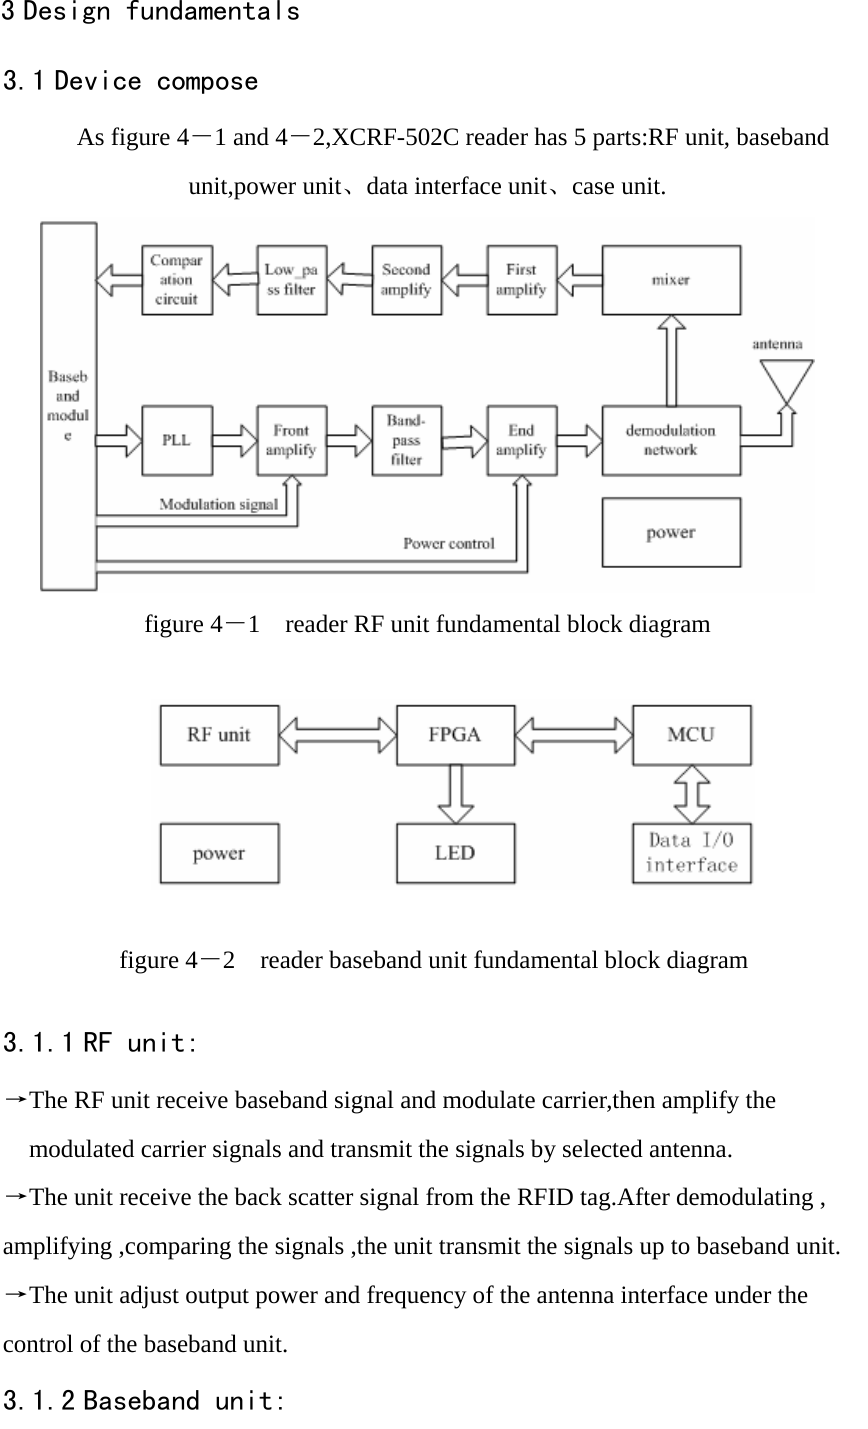                                                                                                                                                3 Design fundamentals 3.1 Device compose As figure 4－1 and 4－2,XCRF-502C reader has 5 parts:RF unit, baseband unit,power unit、data interface unit、case unit.        figure 4－1    reader RF unit fundamental block diagram     figure 4－2    reader baseband unit fundamental block diagram  3.1.1 RF unit: →The RF unit receive baseband signal and modulate carrier,then amplify the modulated carrier signals and transmit the signals by selected antenna. →The unit receive the back scatter signal from the RFID tag.After demodulating , amplifying ,comparing the signals ,the unit transmit the signals up to baseband unit.   →The unit adjust output power and frequency of the antenna interface under the control of the baseband unit. 3.1.2 Baseband unit: 